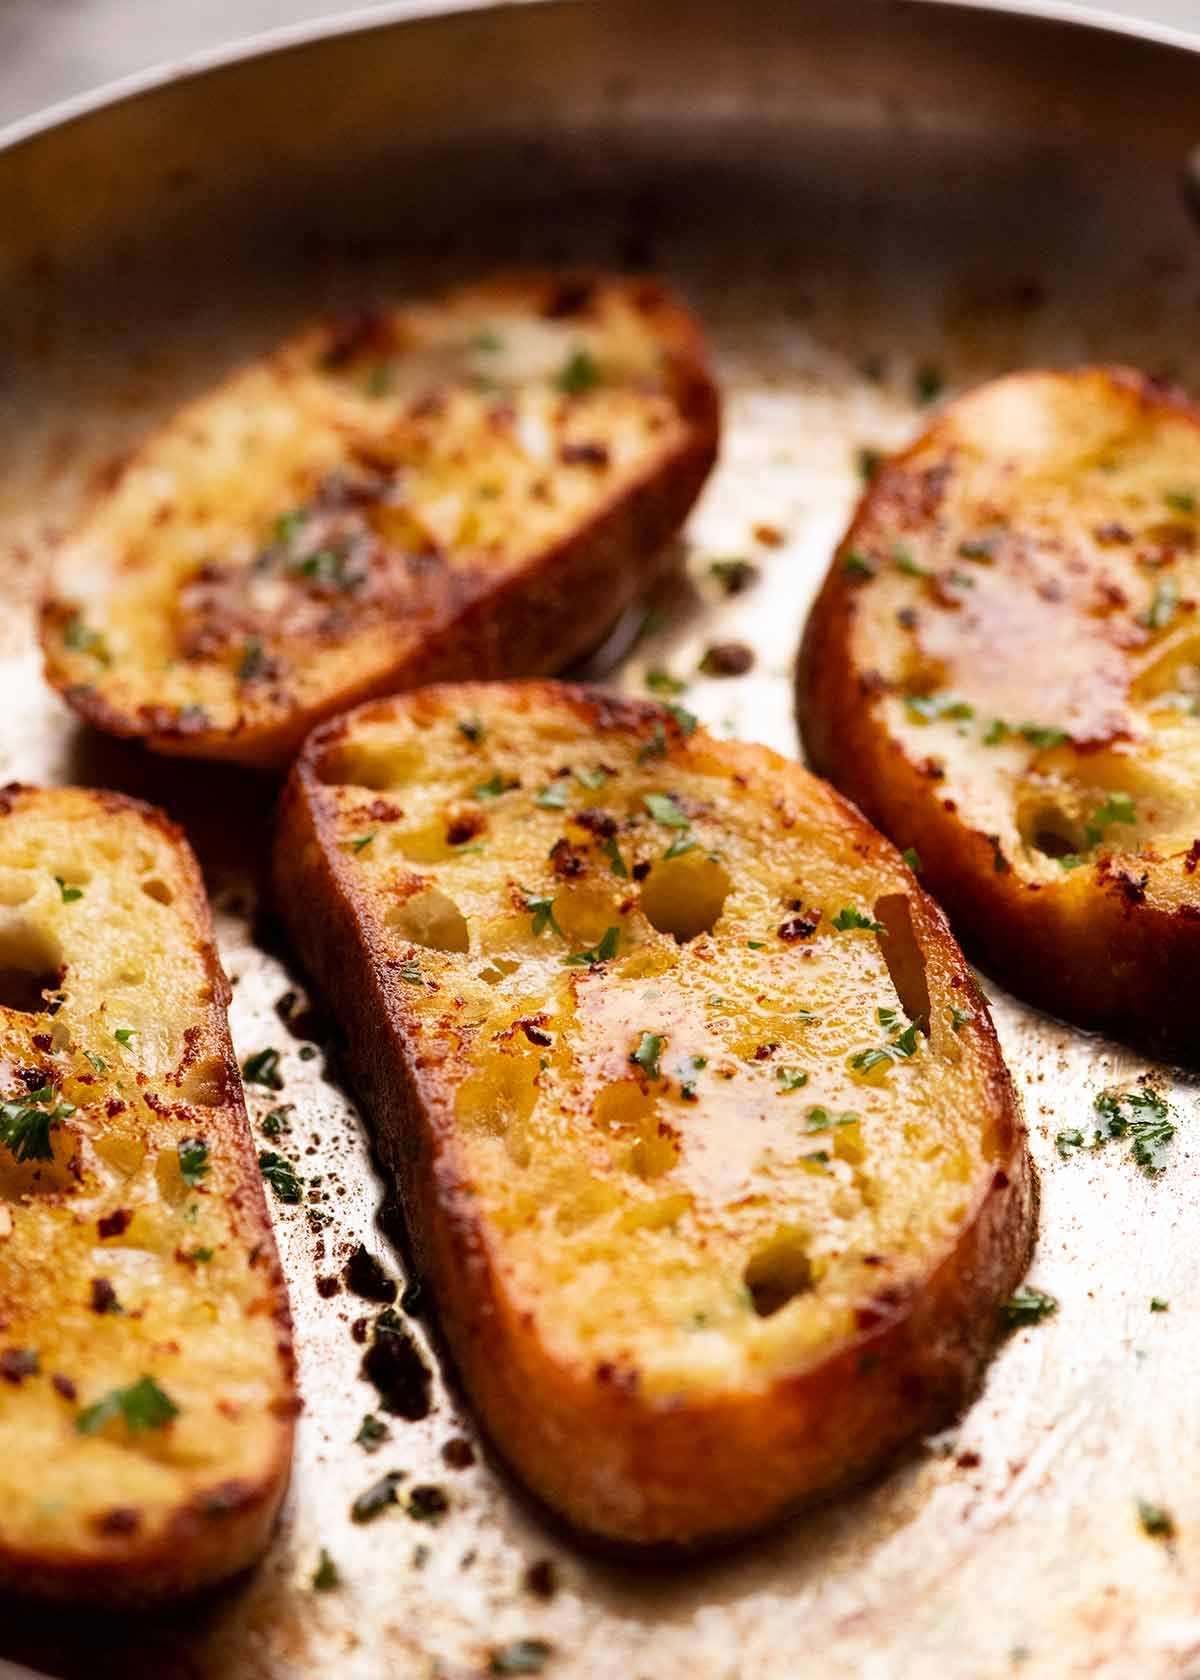 Toast pan fried in leftover lobster salmon garlic butter